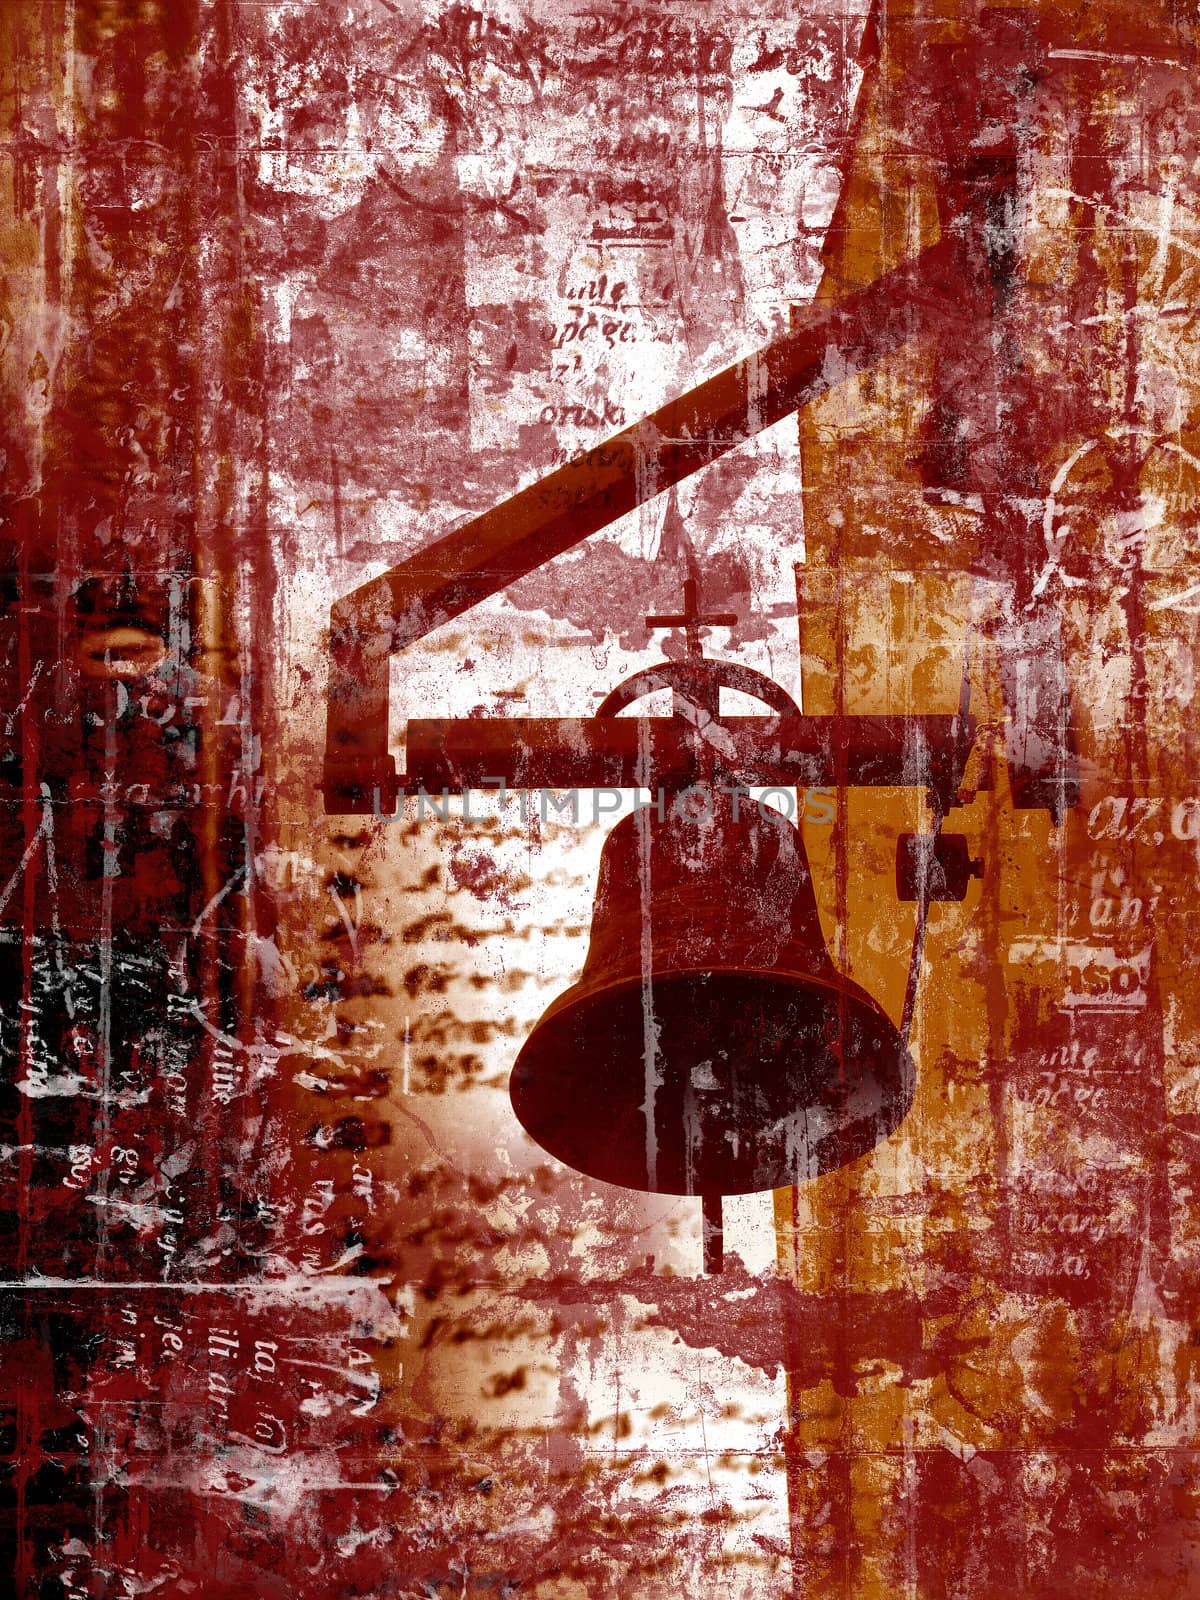 Computer designed highly detailed grunge textured abstract background - church bell